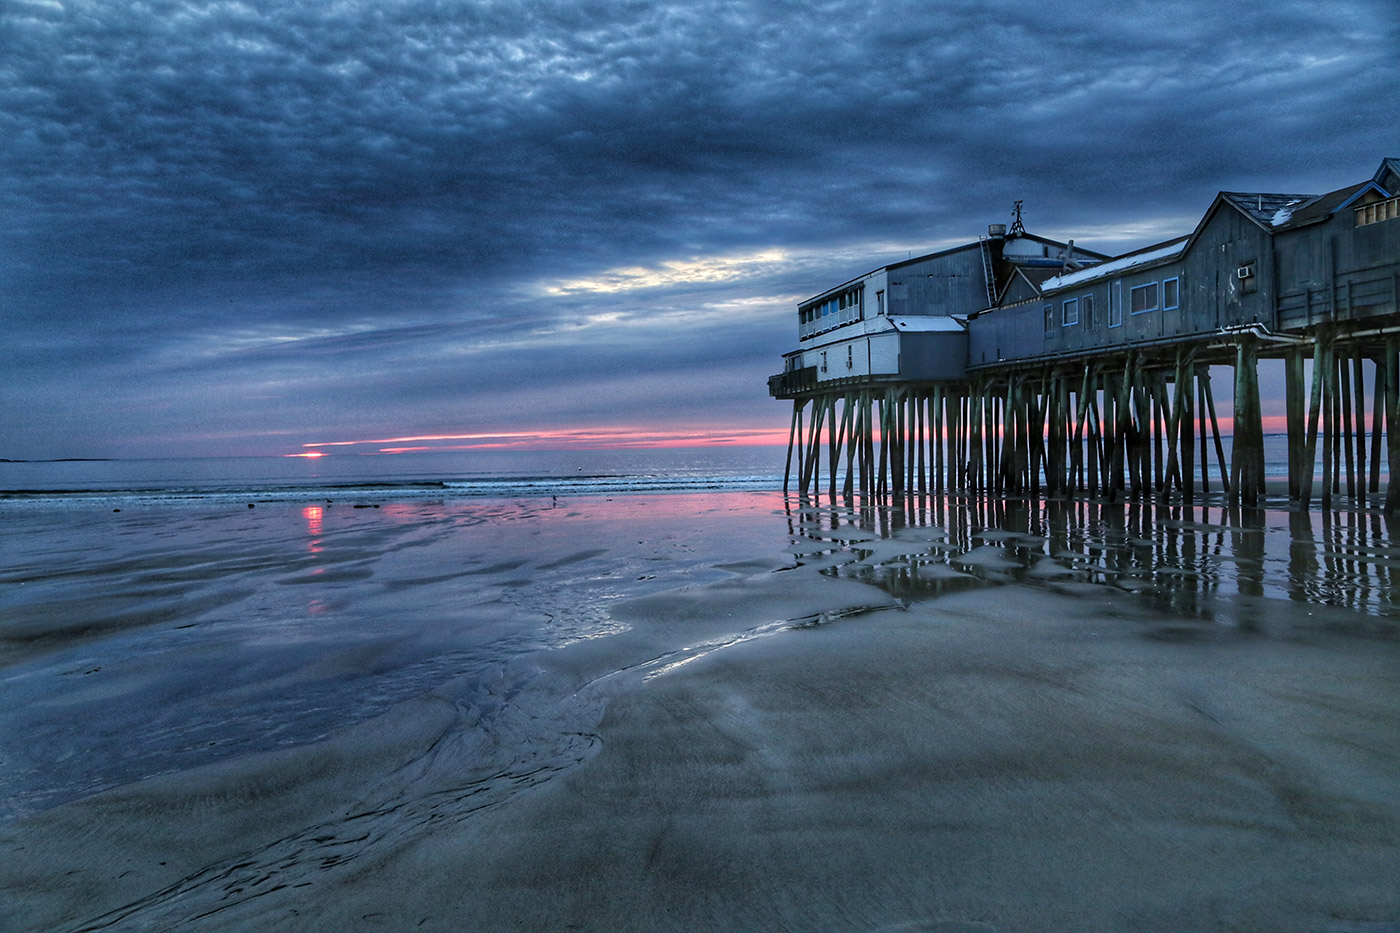 Sunrise at the Old Orchard Beach pier